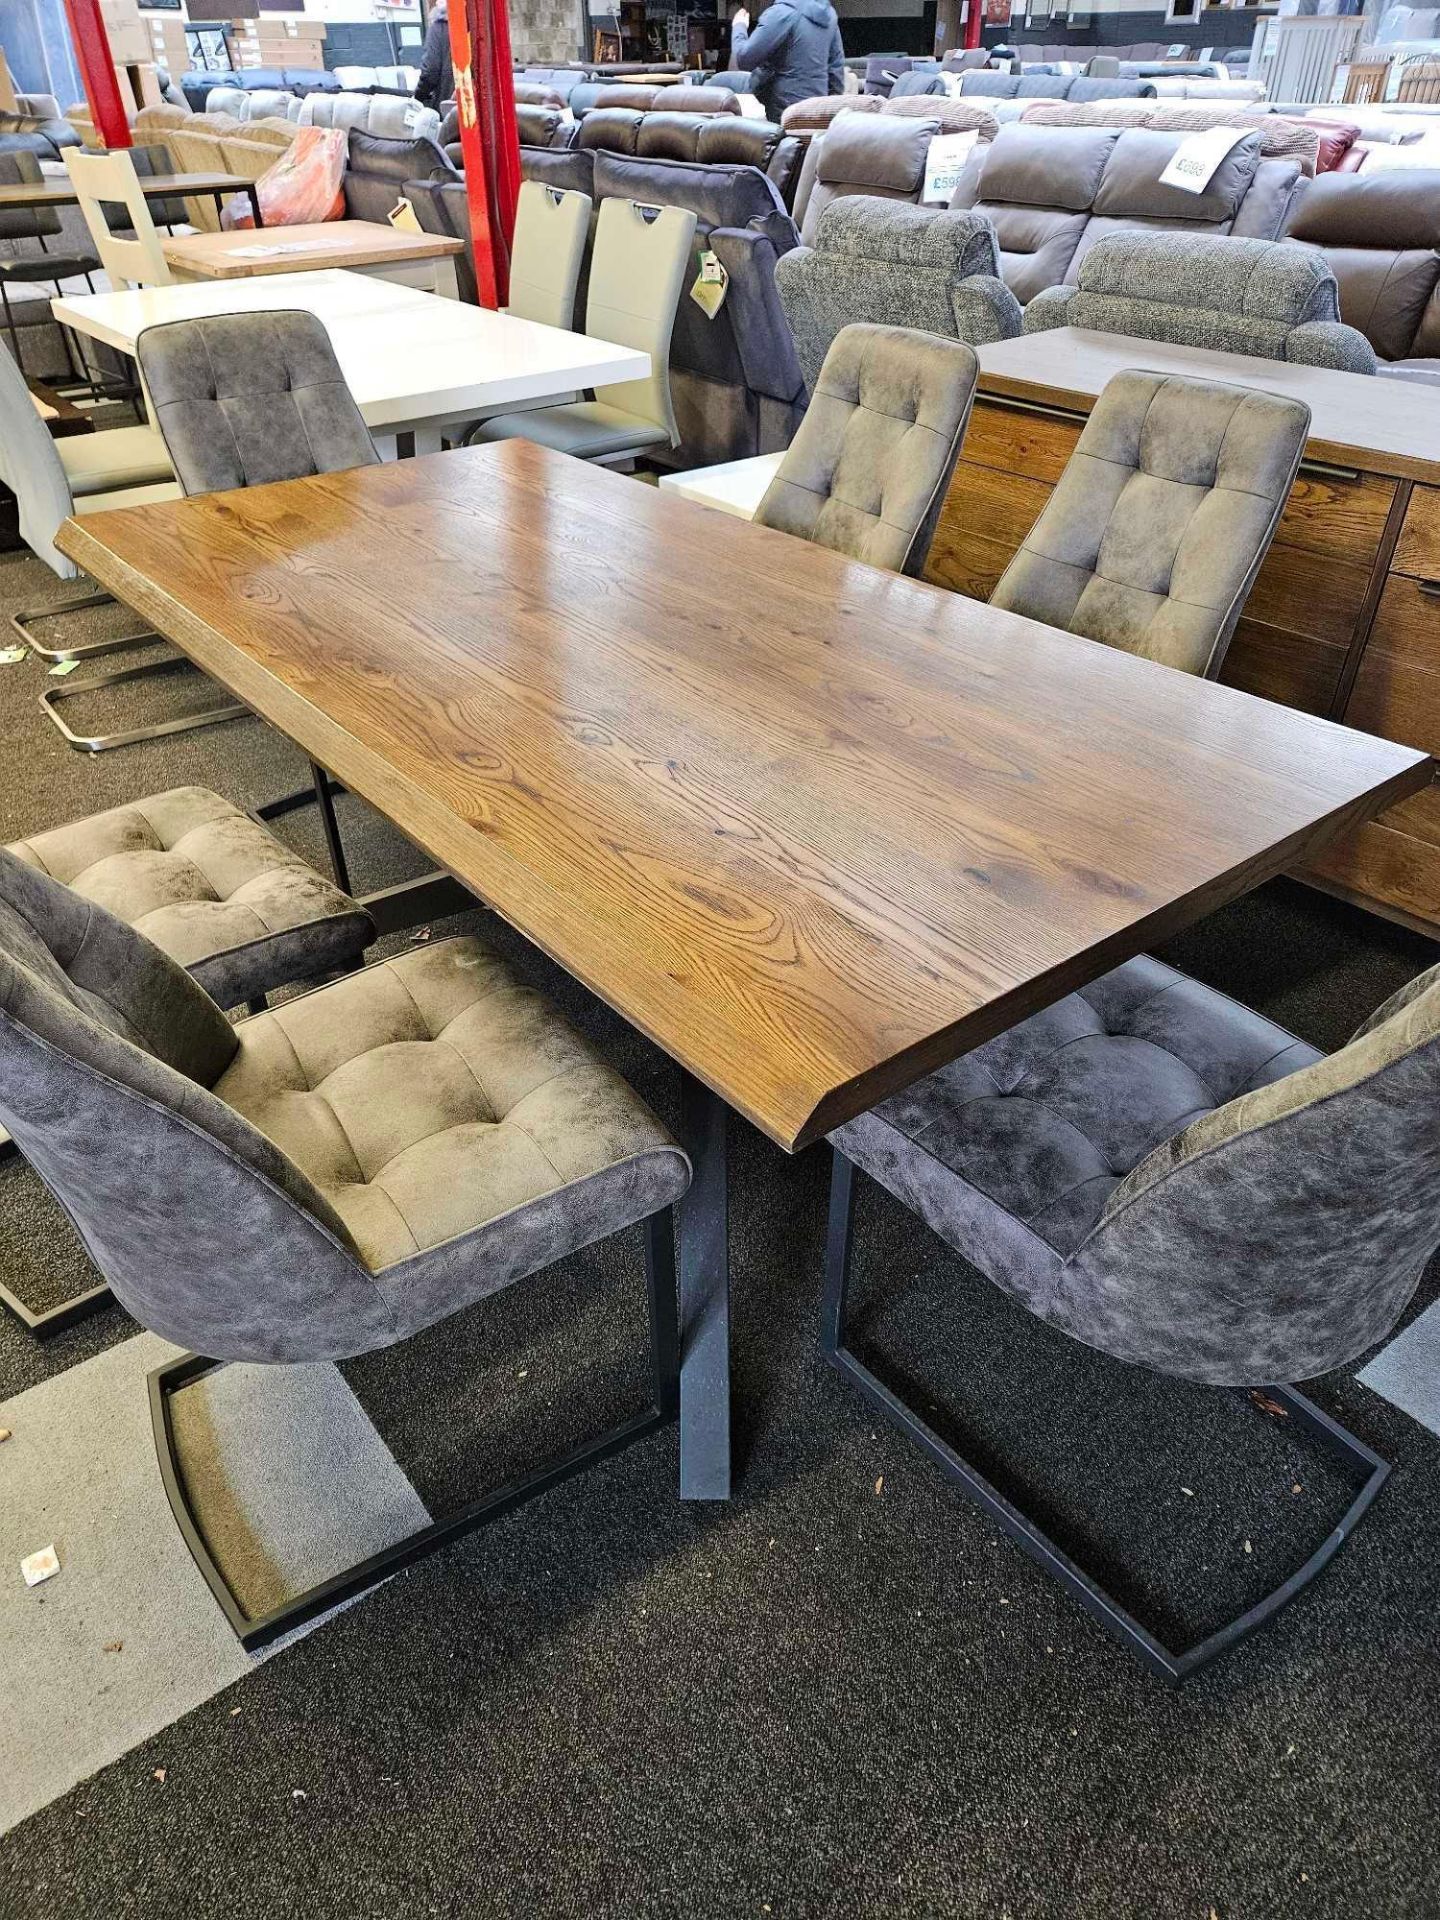 *EX DISPLAY* Osaka furniture village oak rectangular dining table and 6 charcoal grey merlin faux le